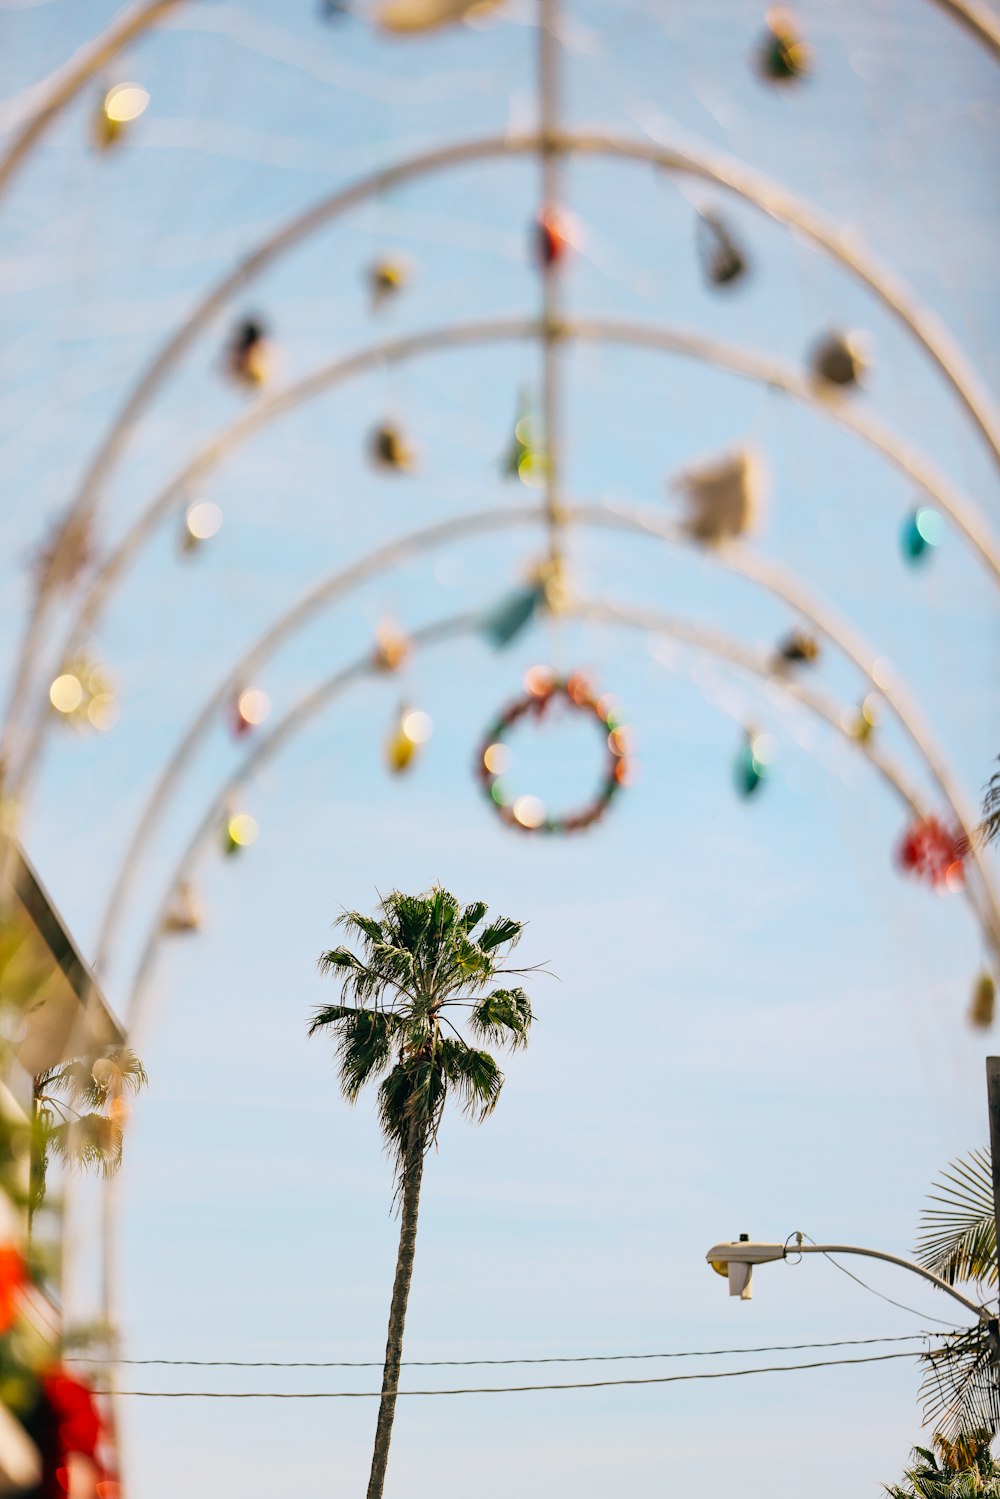 a view of a palm tree through an archway